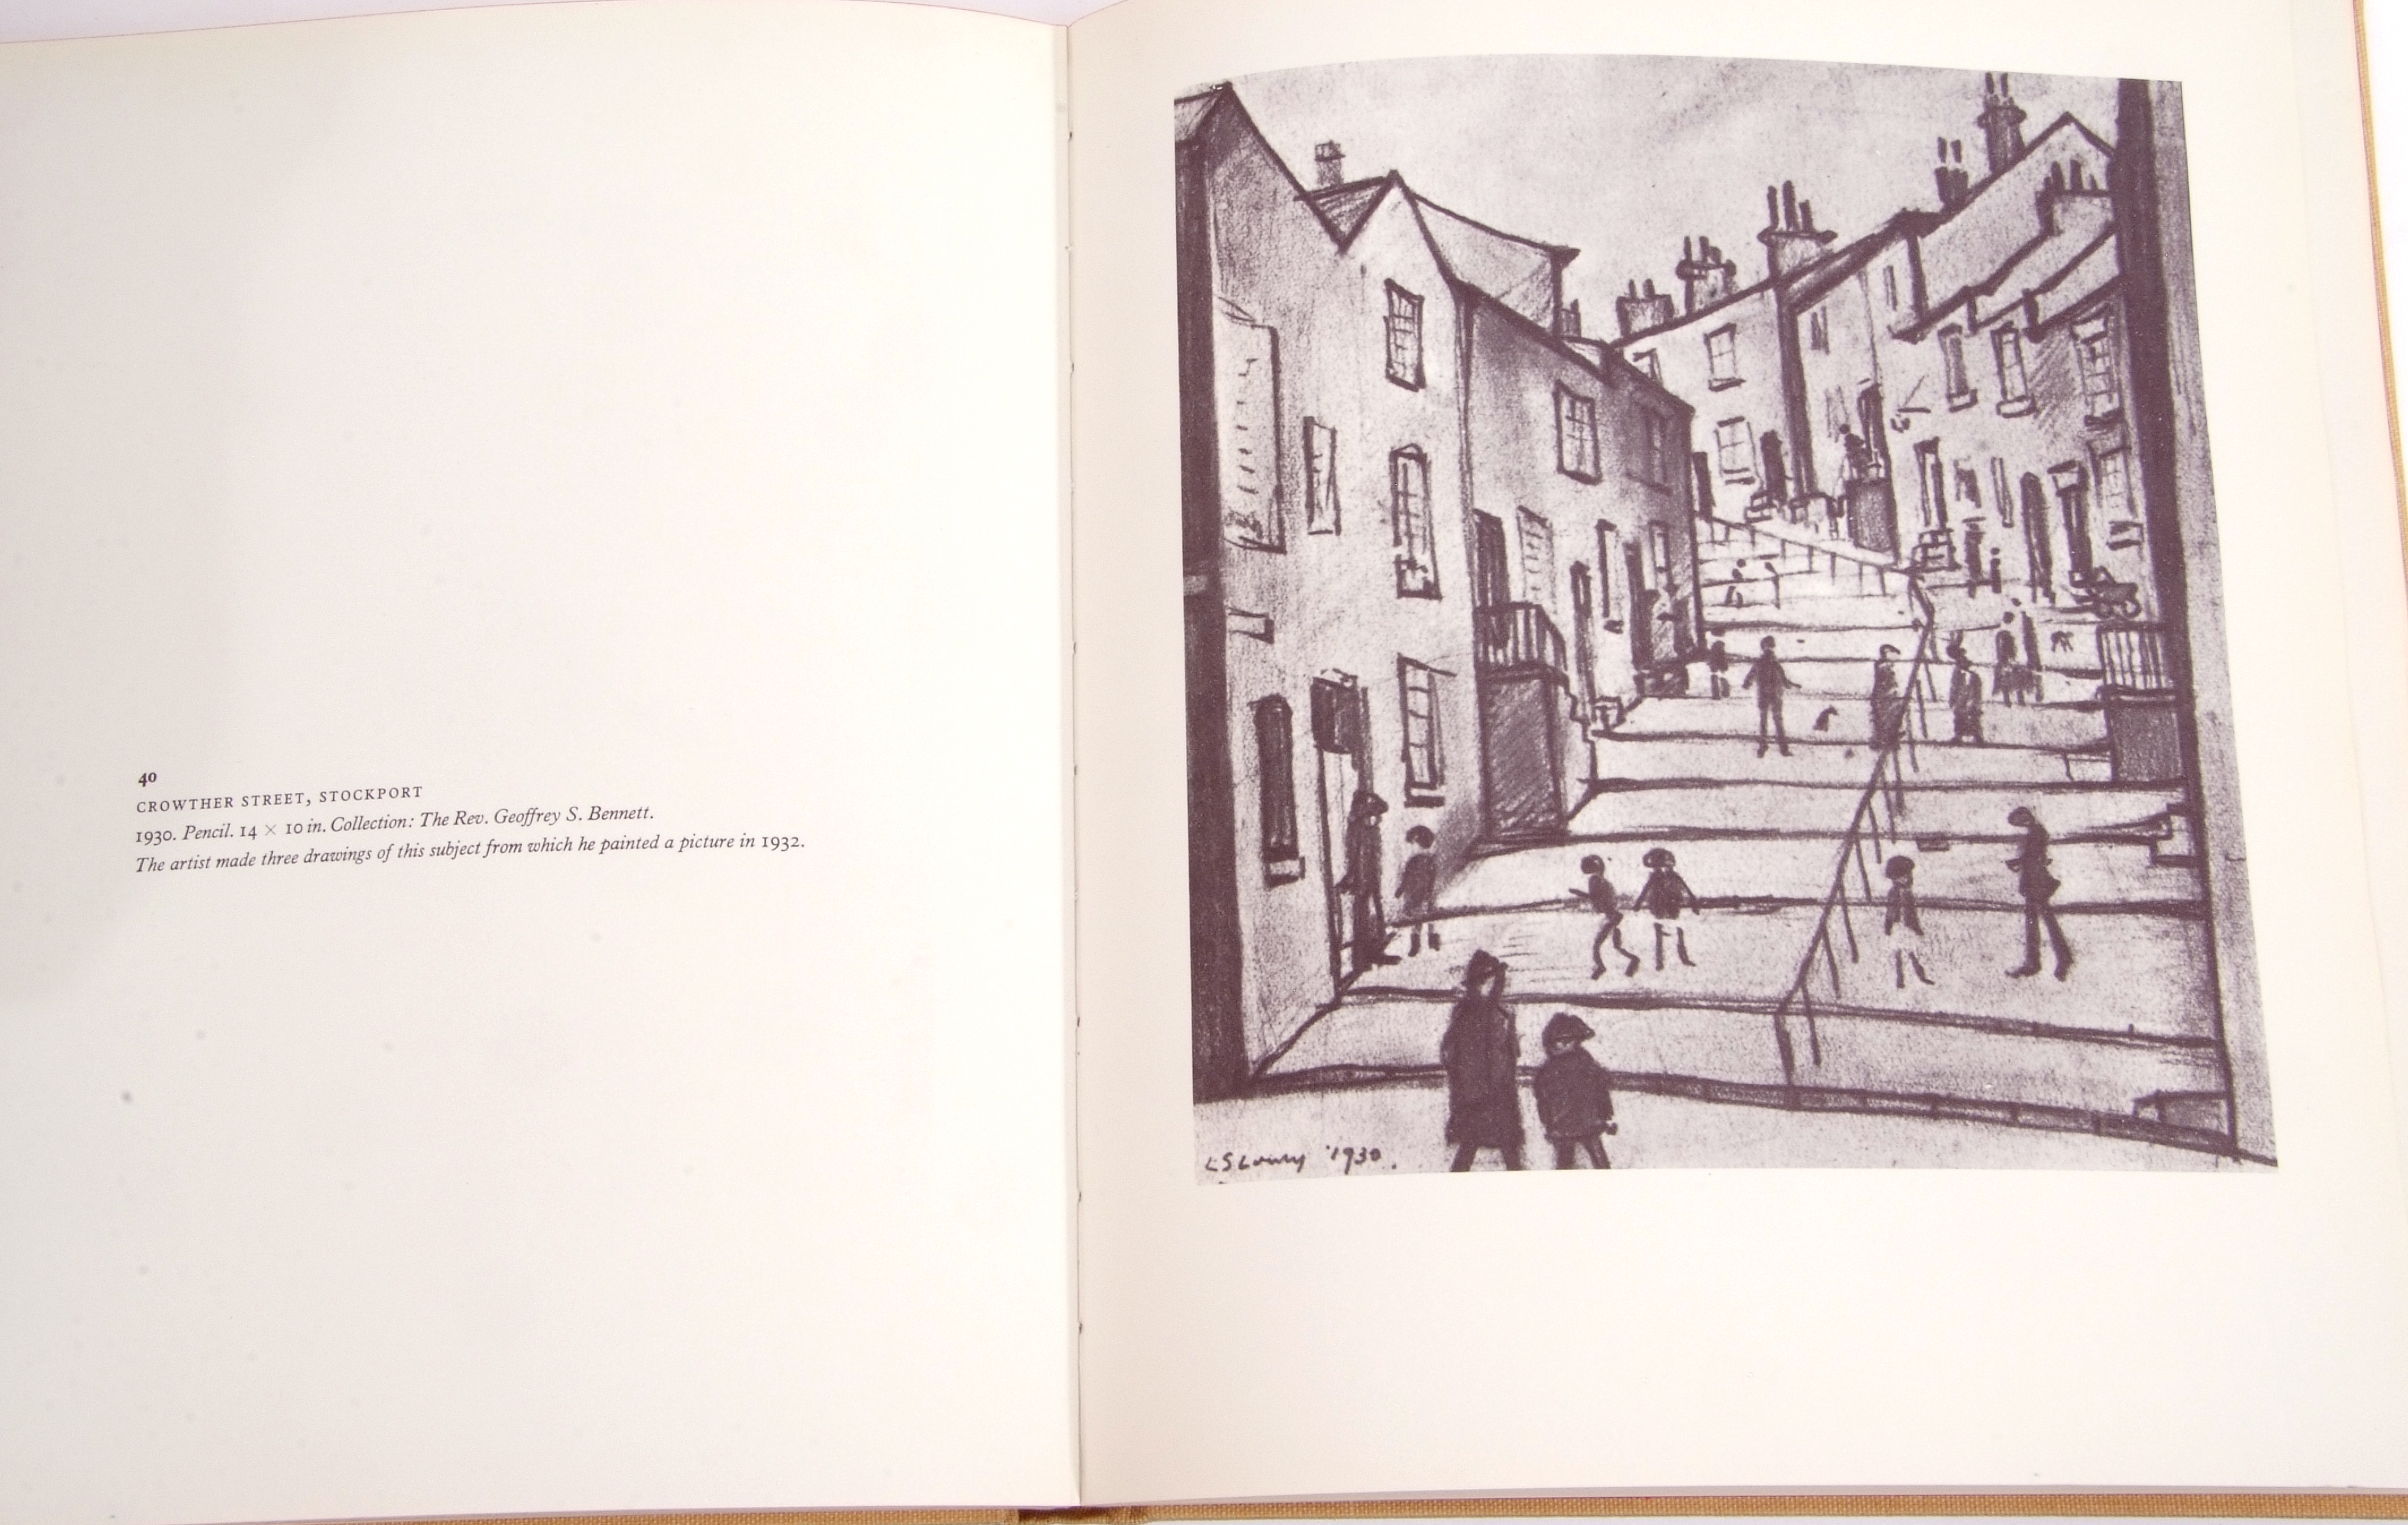 Drawings of L S Lowry, with an introduction and notes by Mervyn Levy - book published by Cory, Adams - Image 2 of 6